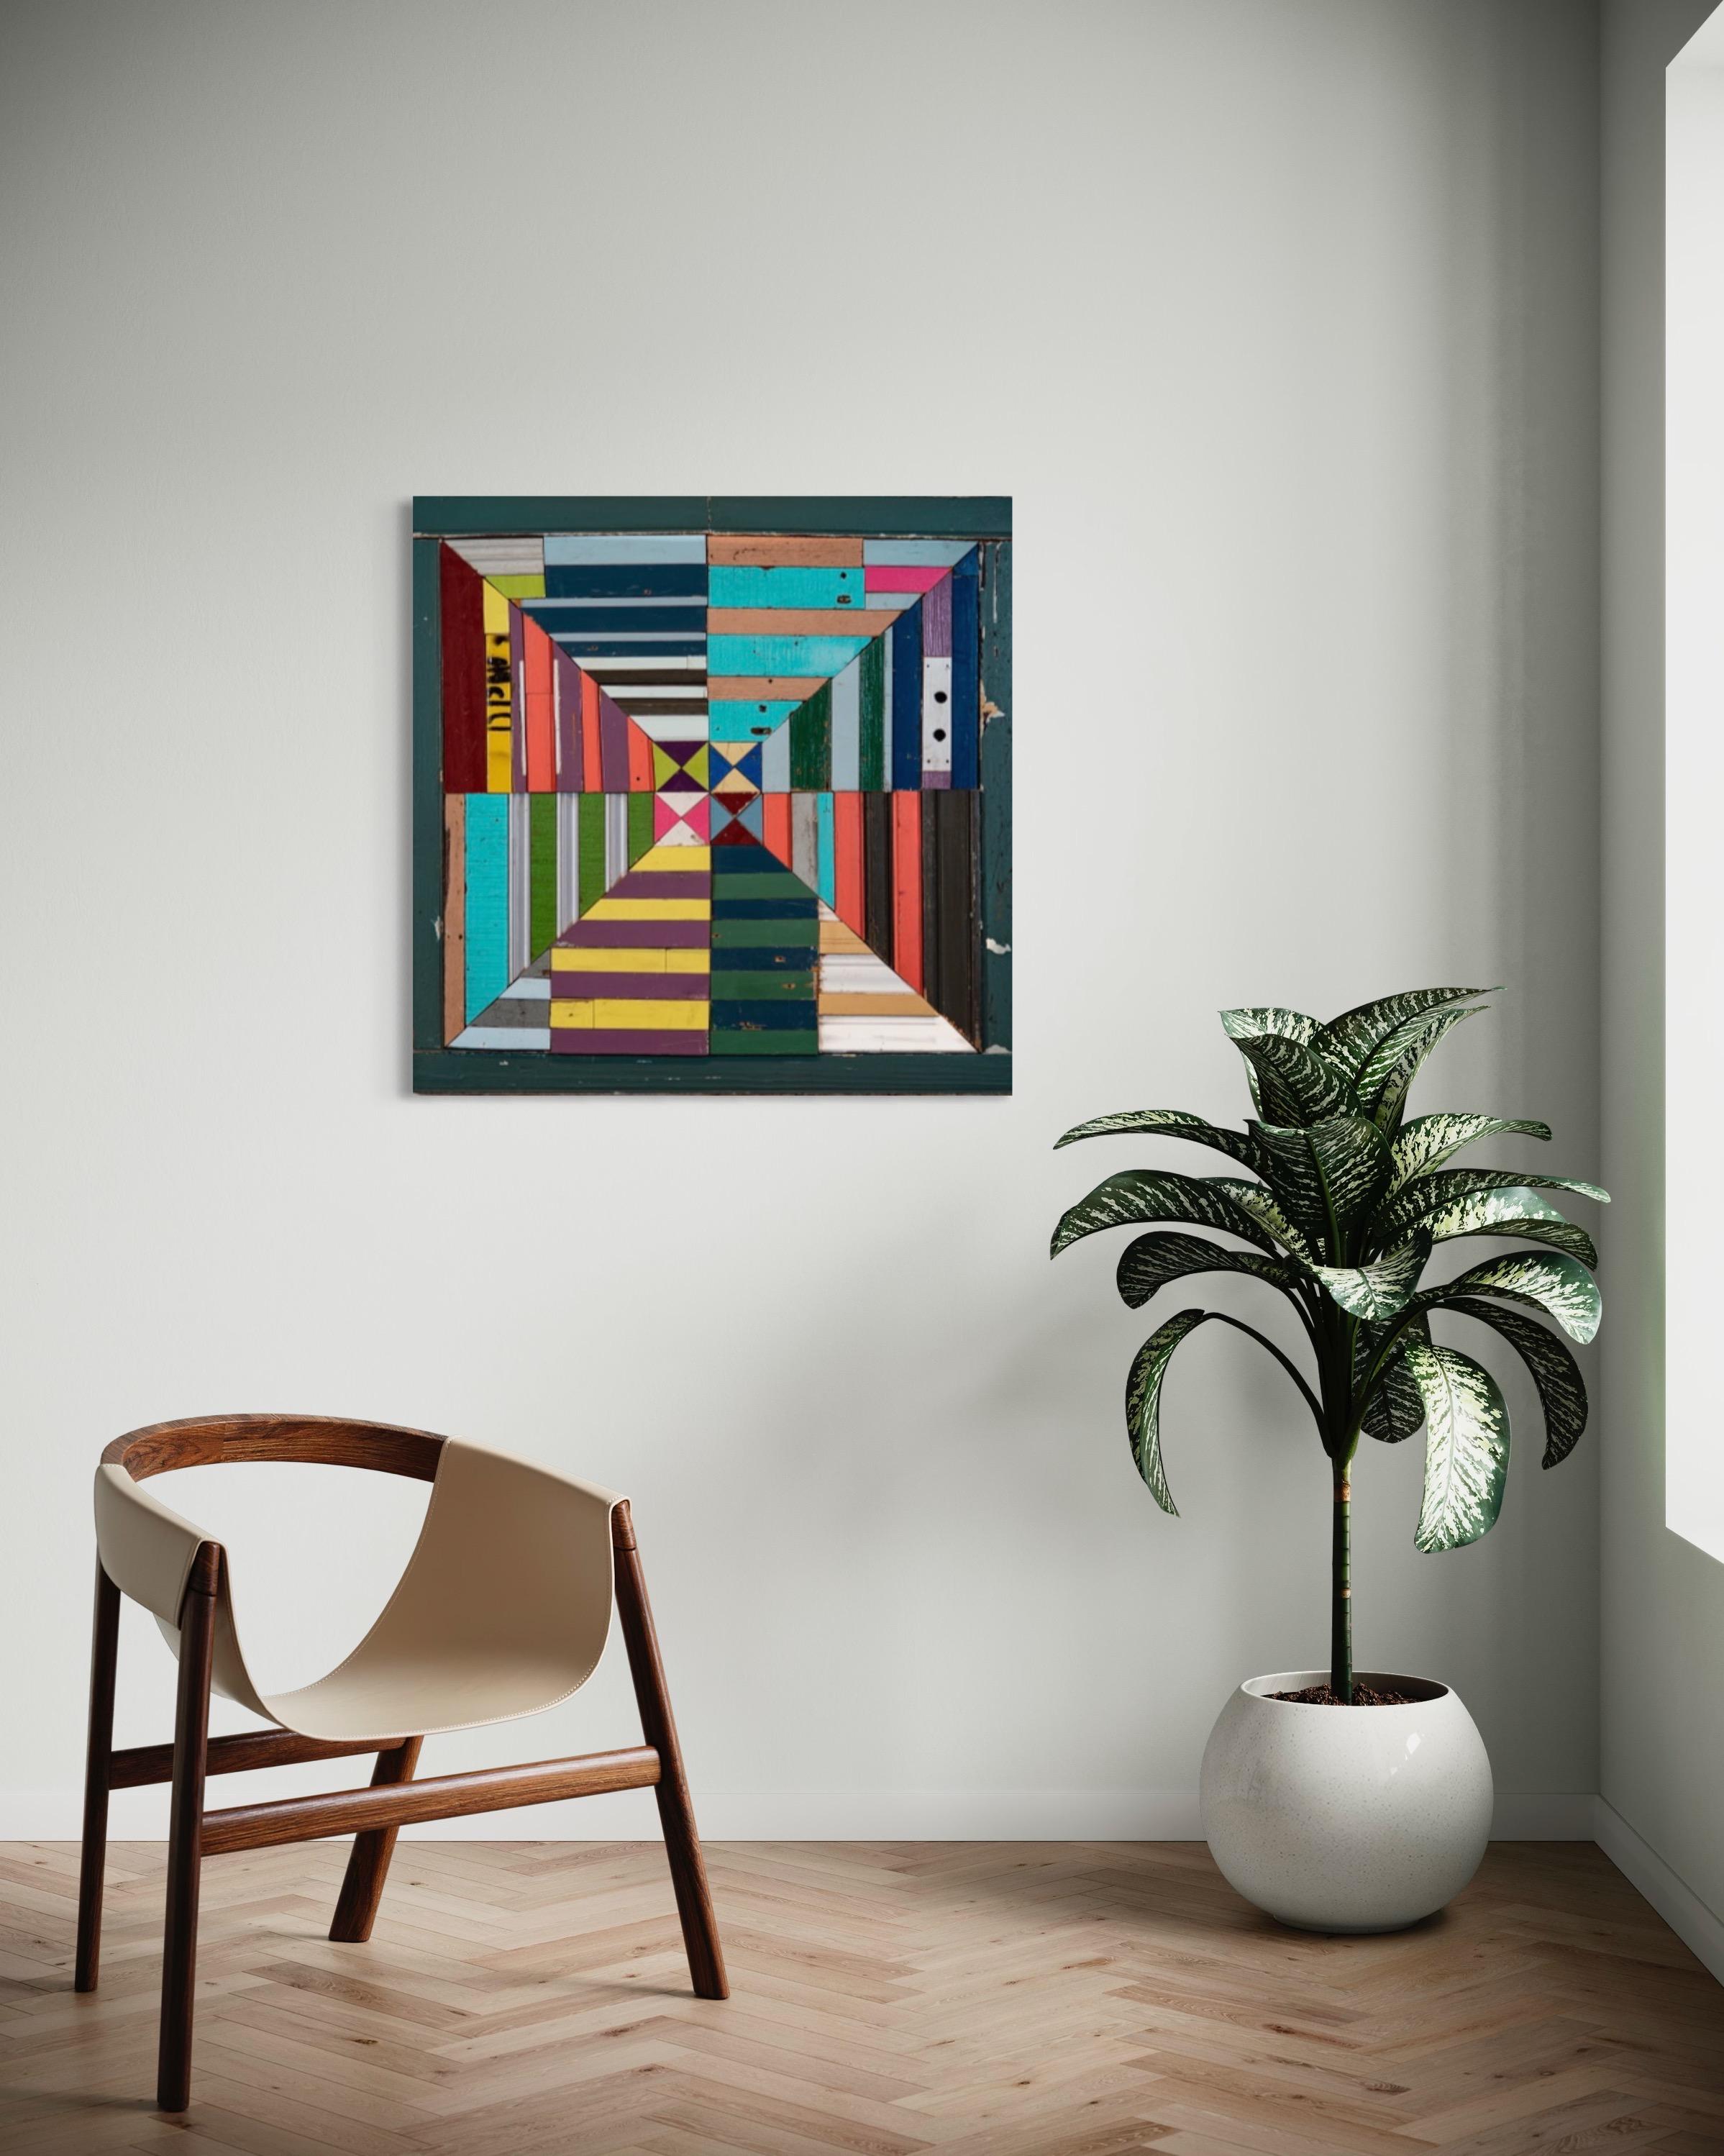 As both formal, abstract art objects and expressions of feminism, traditional American patchwork quilt are designs I ﬁnd familiar and comforting. I piece together this salvaged wood into something meaningful and orderly, seeking solace from climate